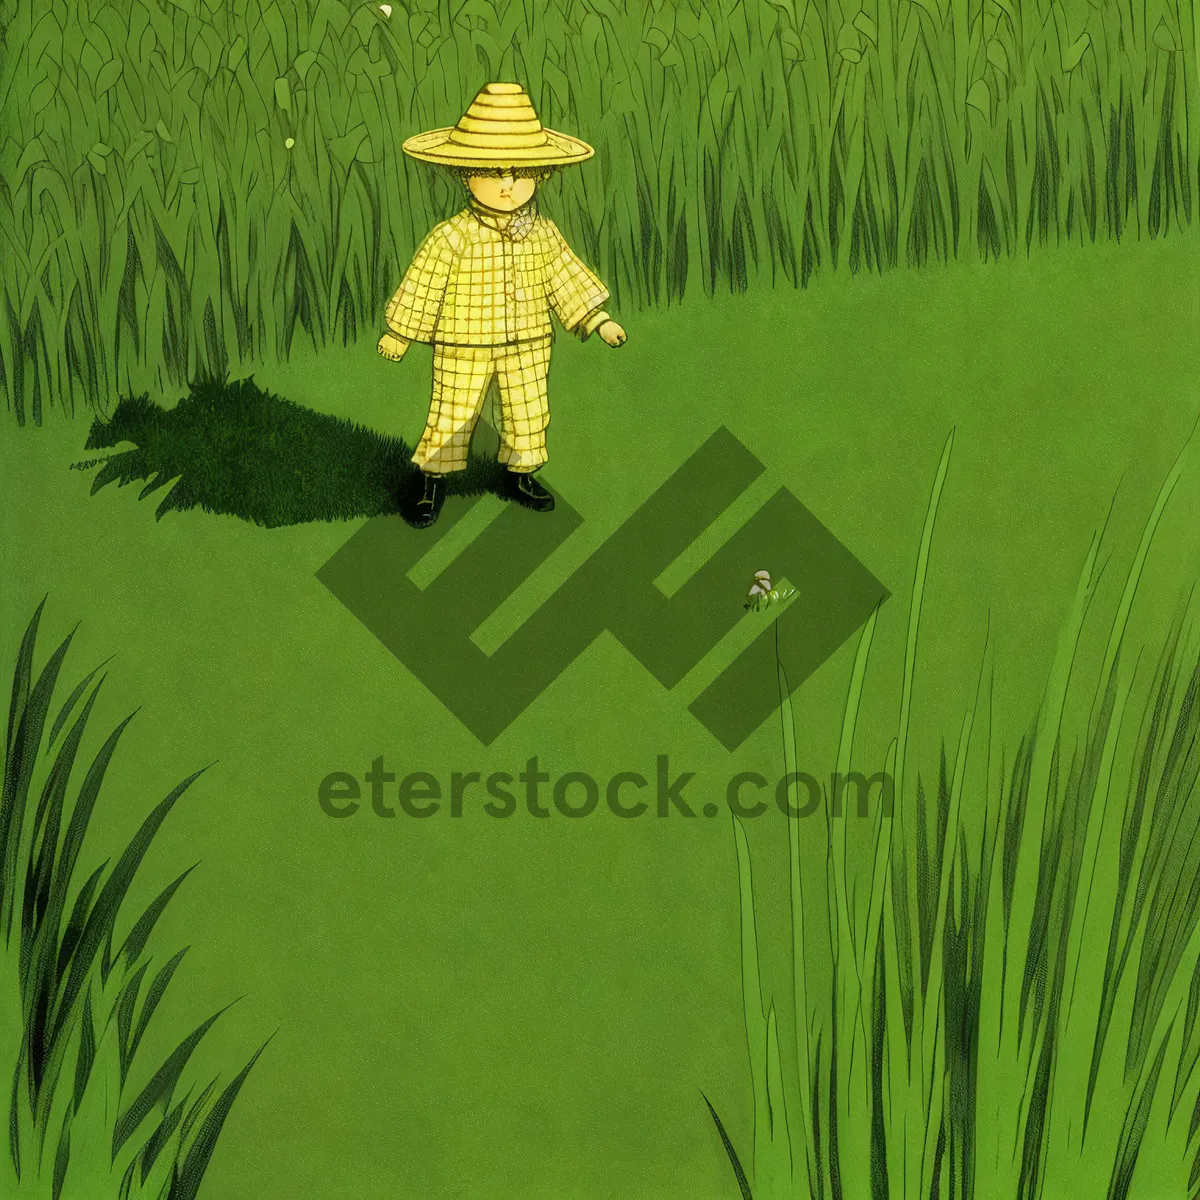 Picture of Summer Meadow Landscape with Wheat Fields and Aquatic Horsetail